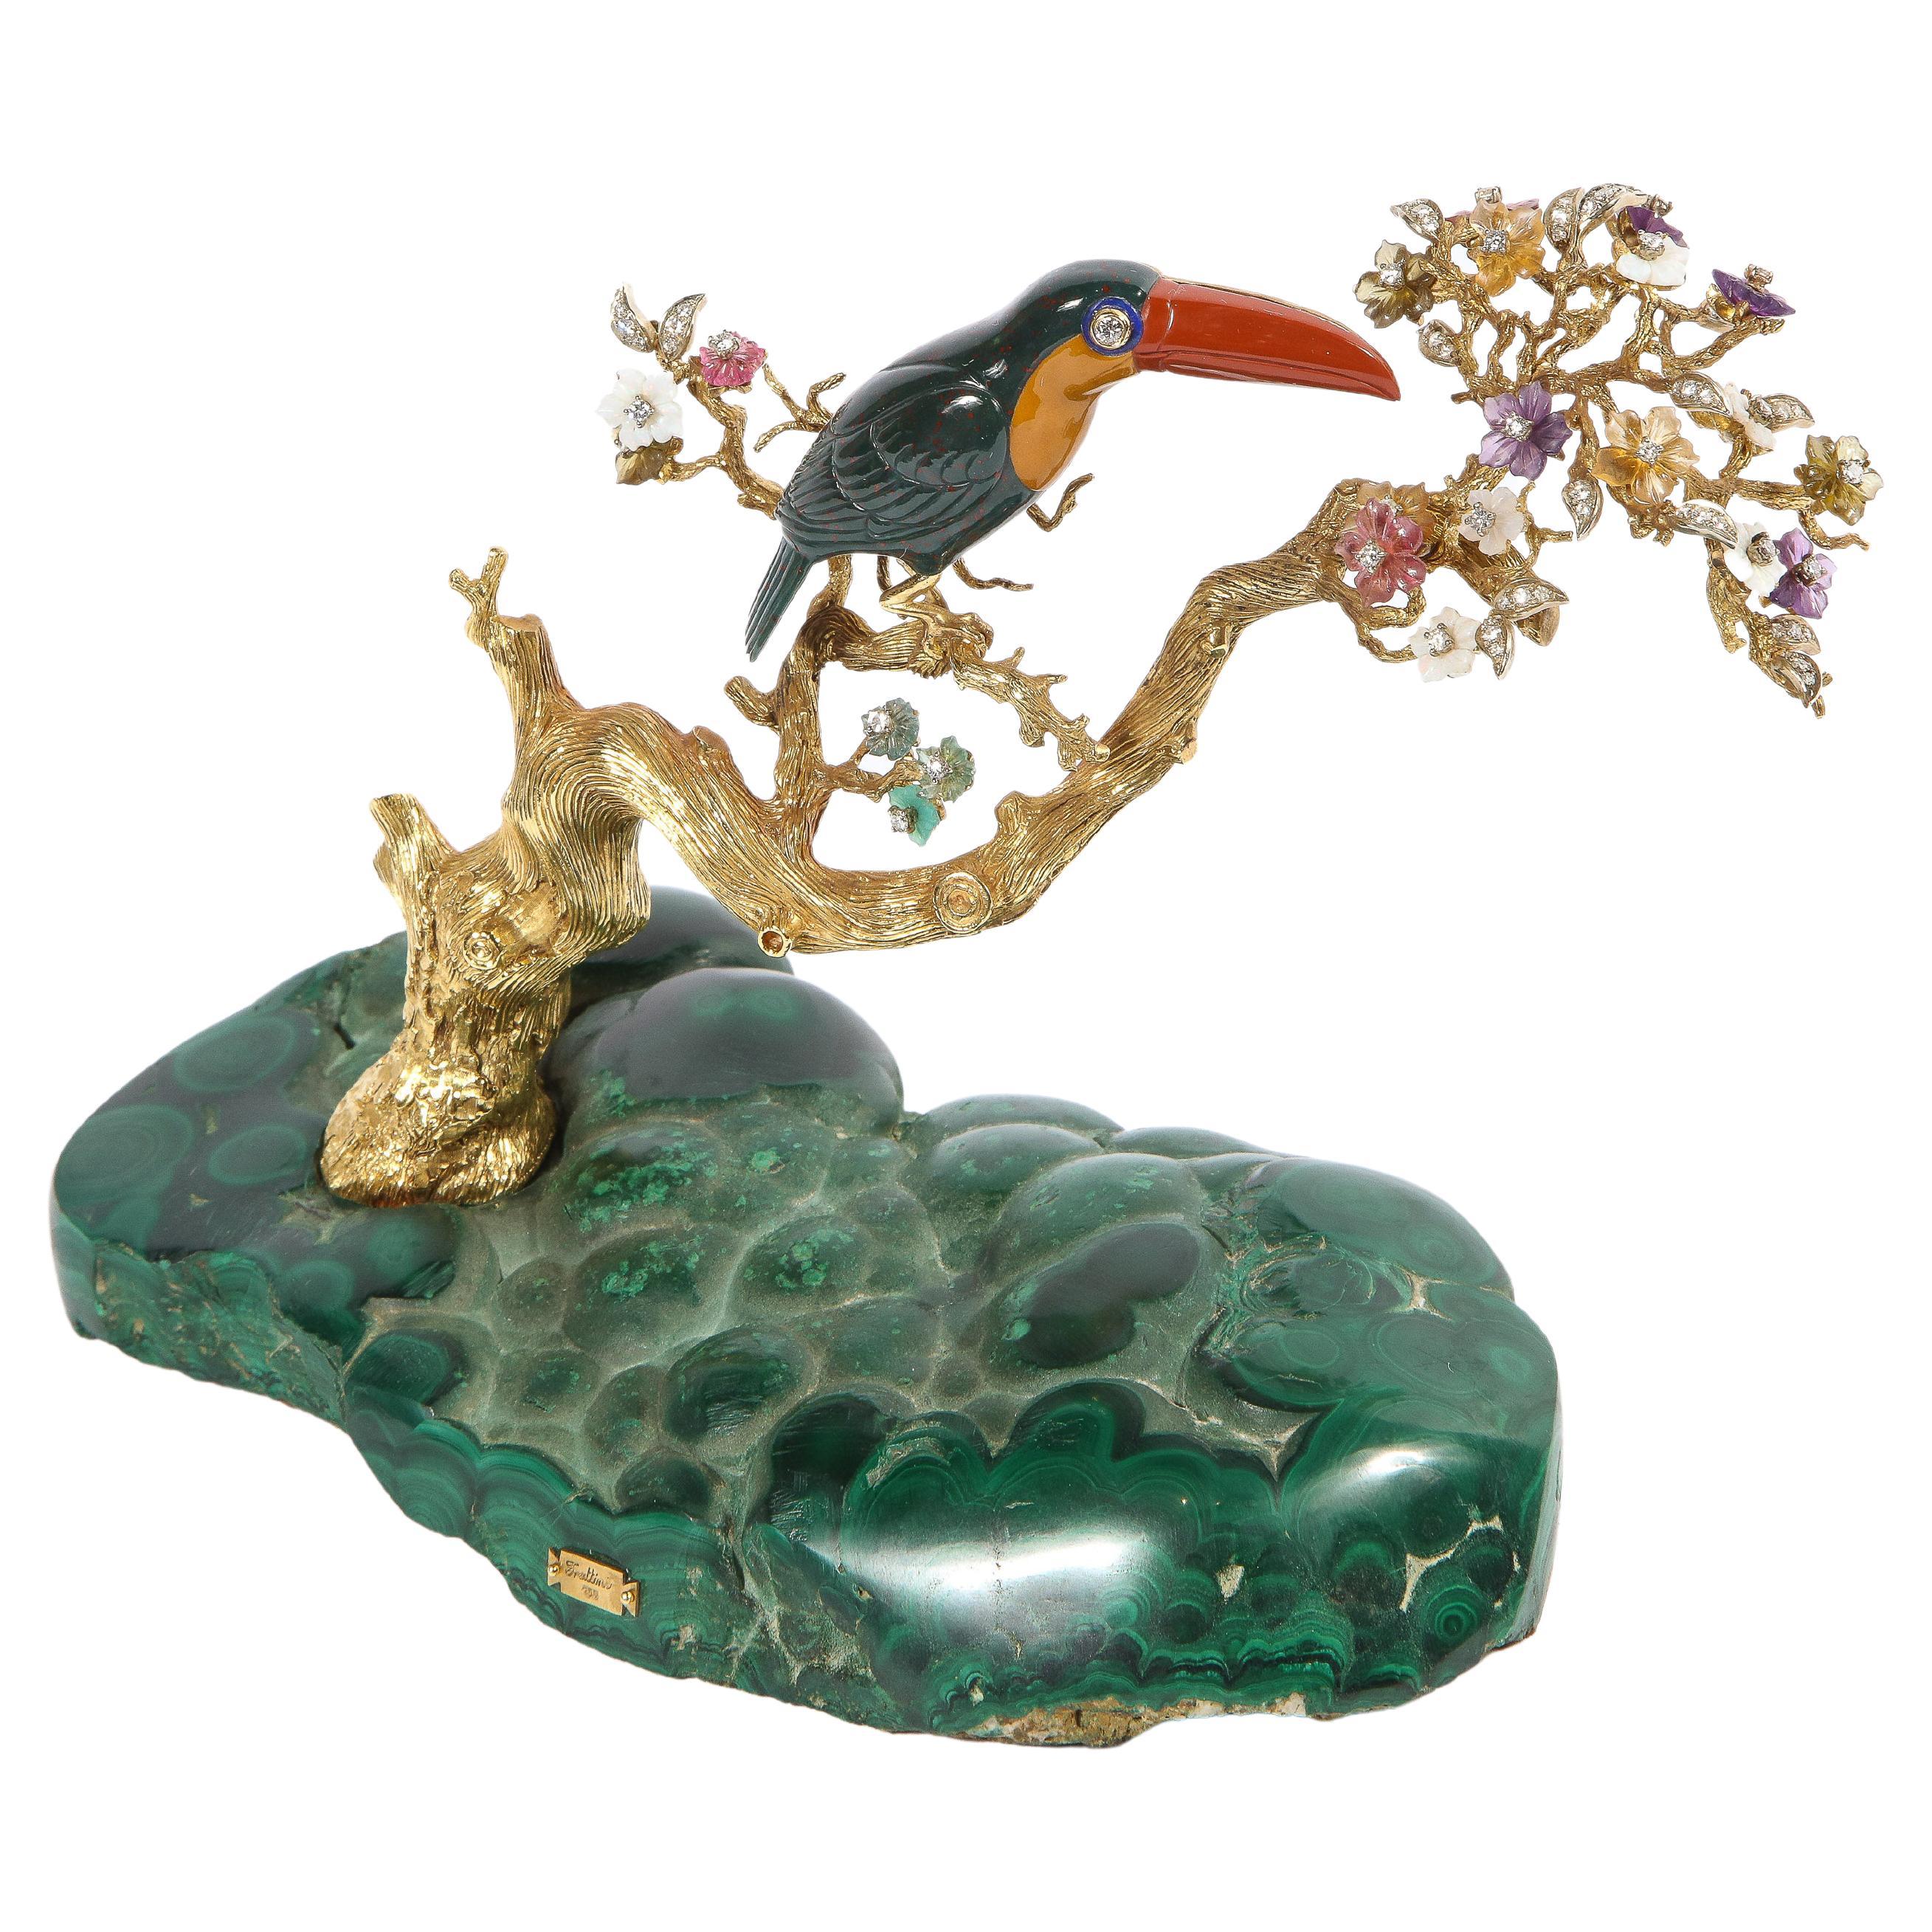 An 18K gold, diamonds, amethyst, tourmaline, bloodstone, carved emerald, opal and jasper toucan bird resting on a gold tree branch, mounted on a carved malachite base.

A very rare and unique gold-mounted jeweled object - a true collectors